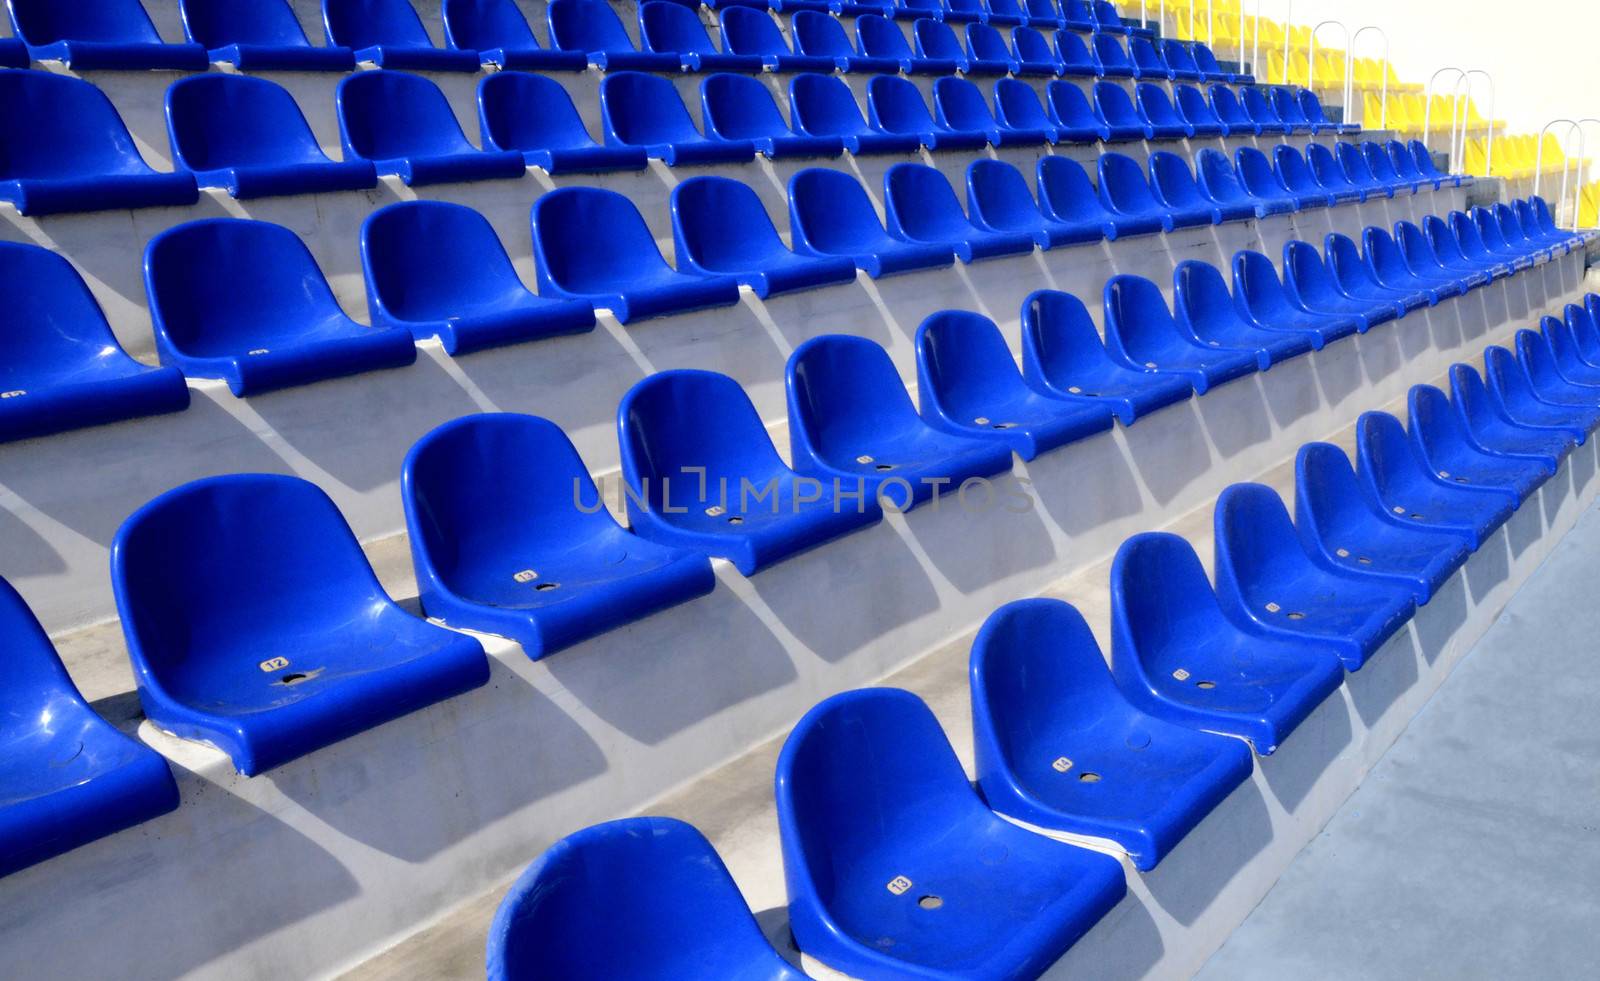 Empty plastic blue and yellow seats in a stadium 